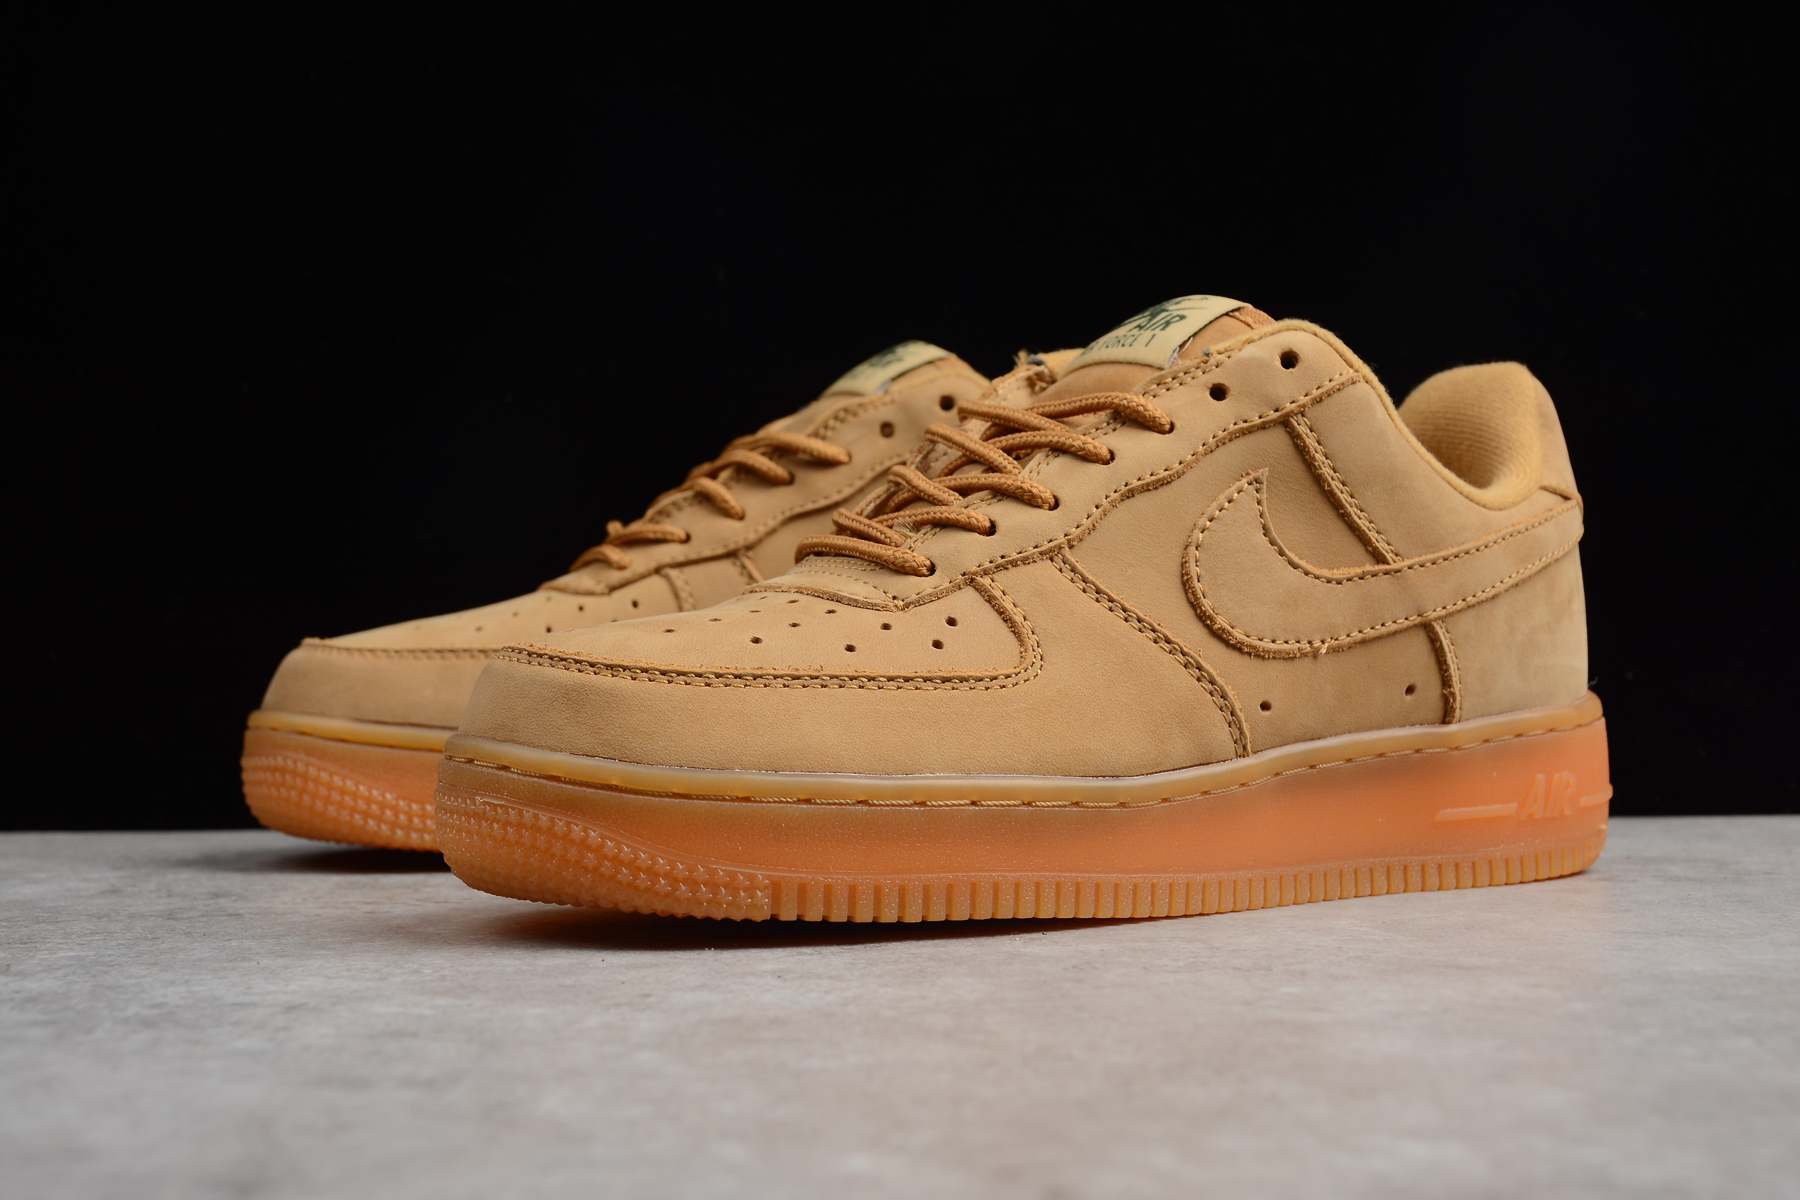 Latest Nike Mens and WMNS Air Force 1 Low "Wheat" Flax/Flax 888853-200